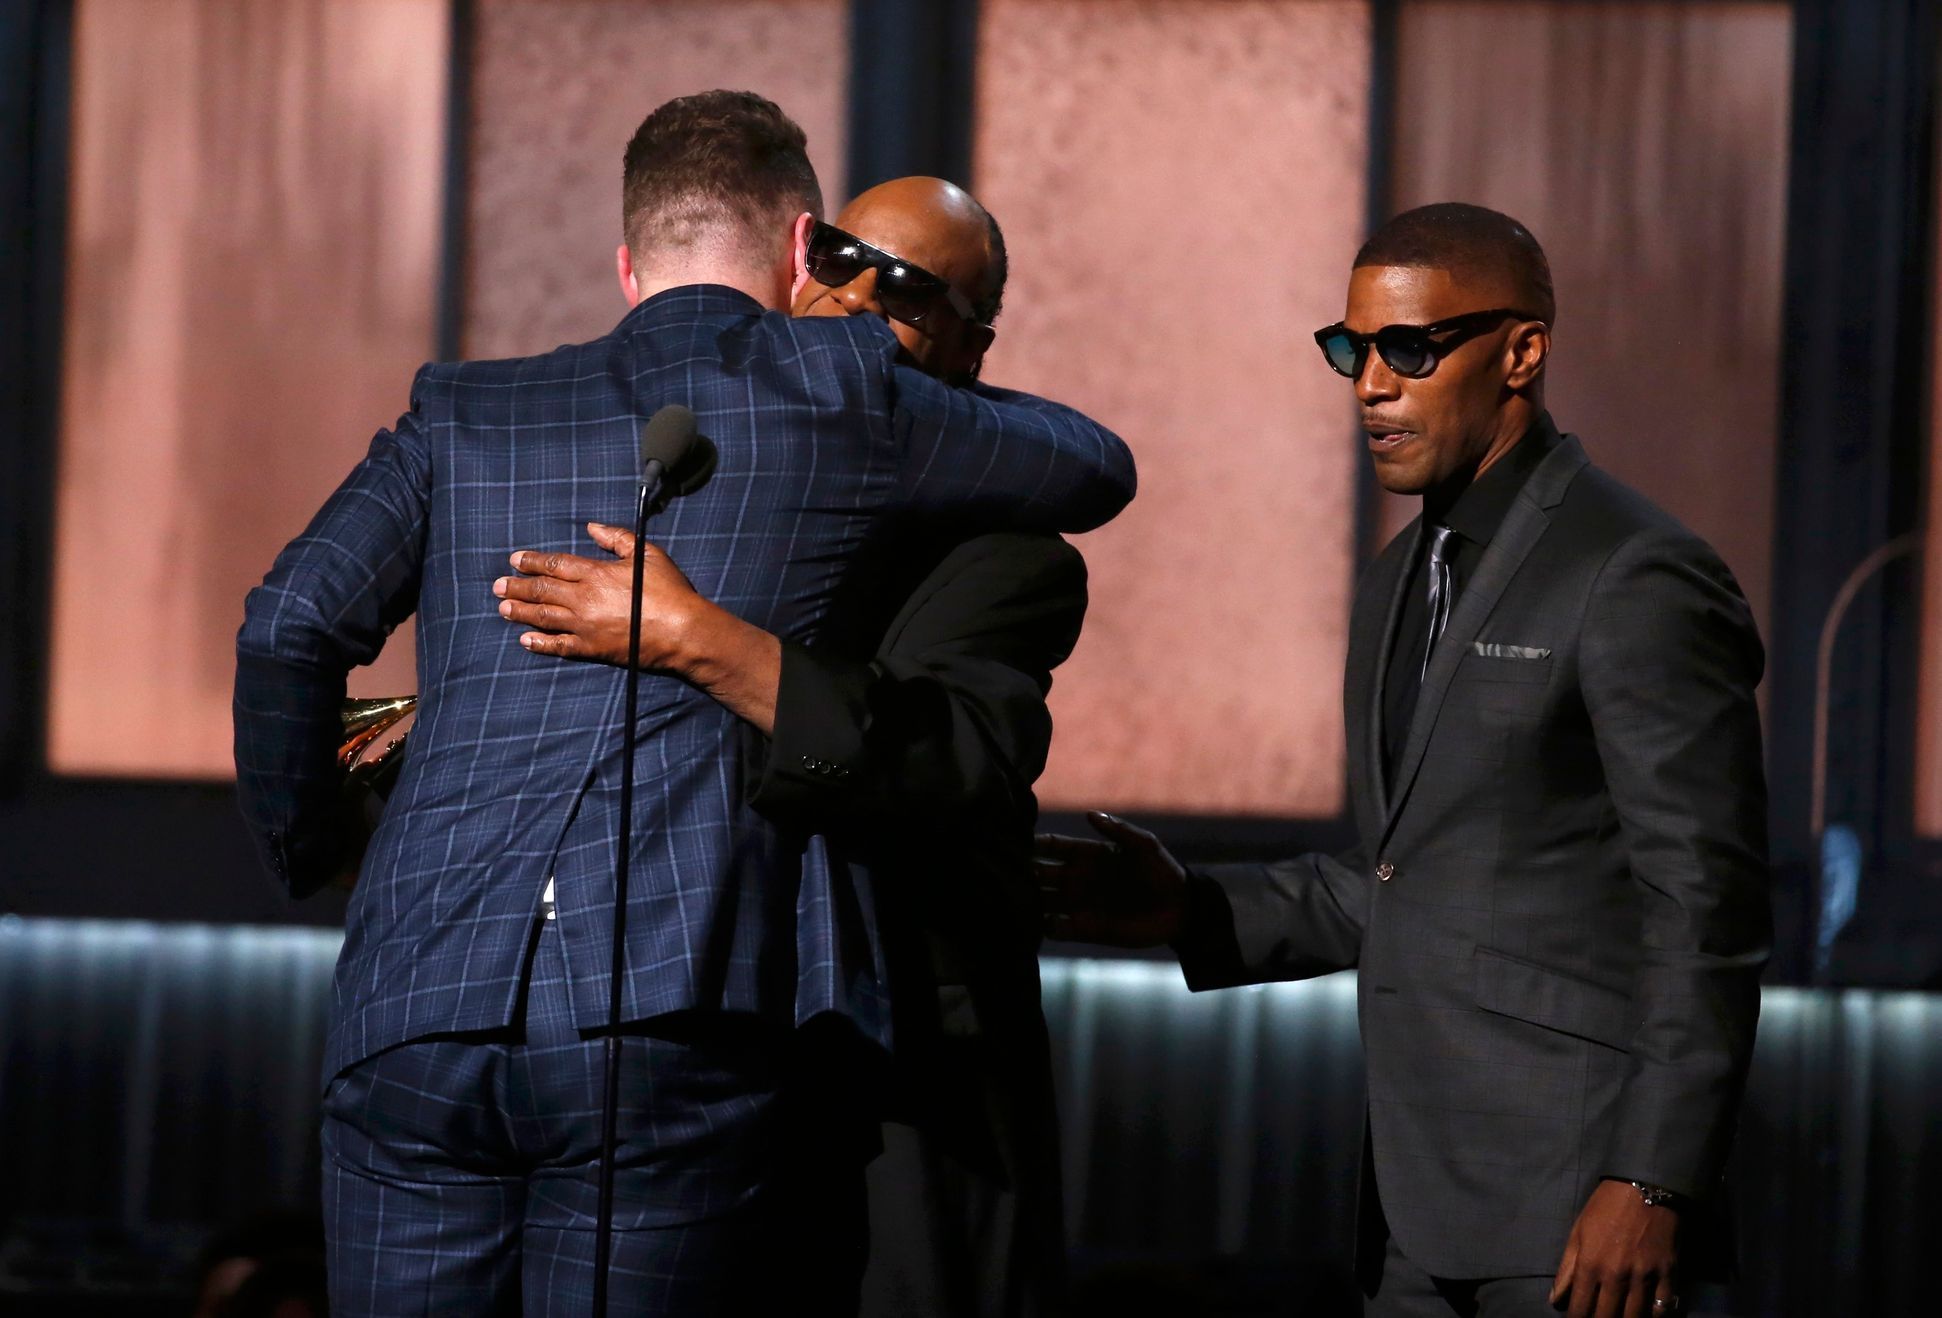 Smith accepts the award for record of the year from presenters Wonder and Foxx at the 57th annual Grammy Awards in Los Angeles